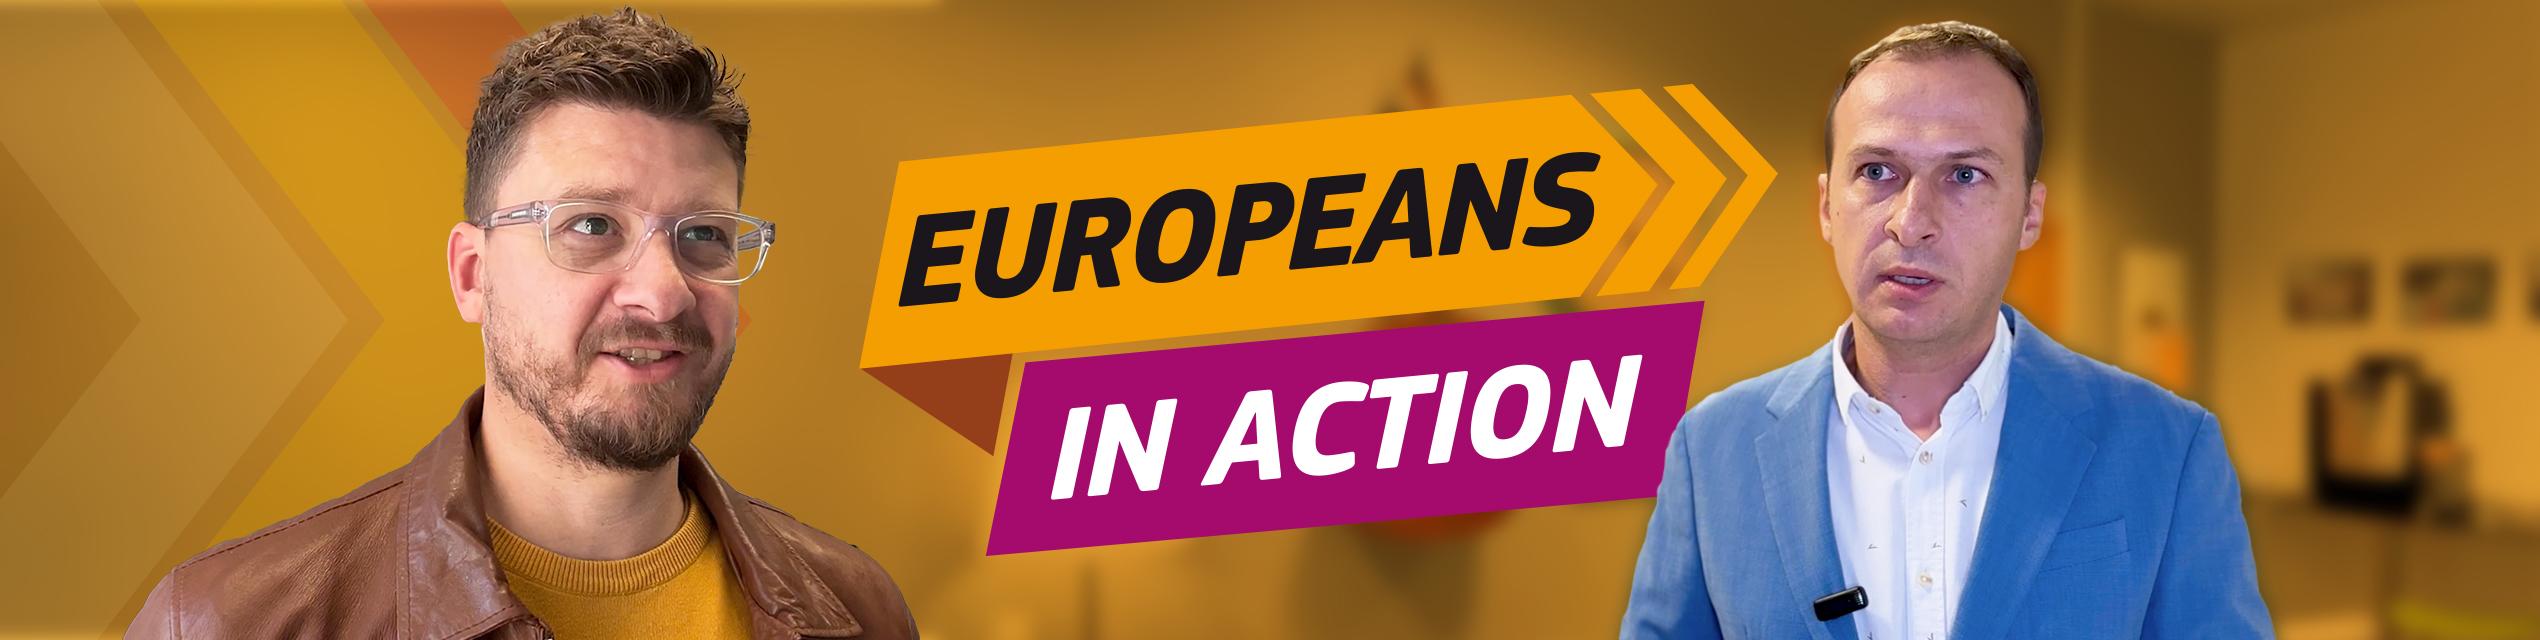 2 protagonists of the campaign on an orange background and Europeans in Action written in the middle